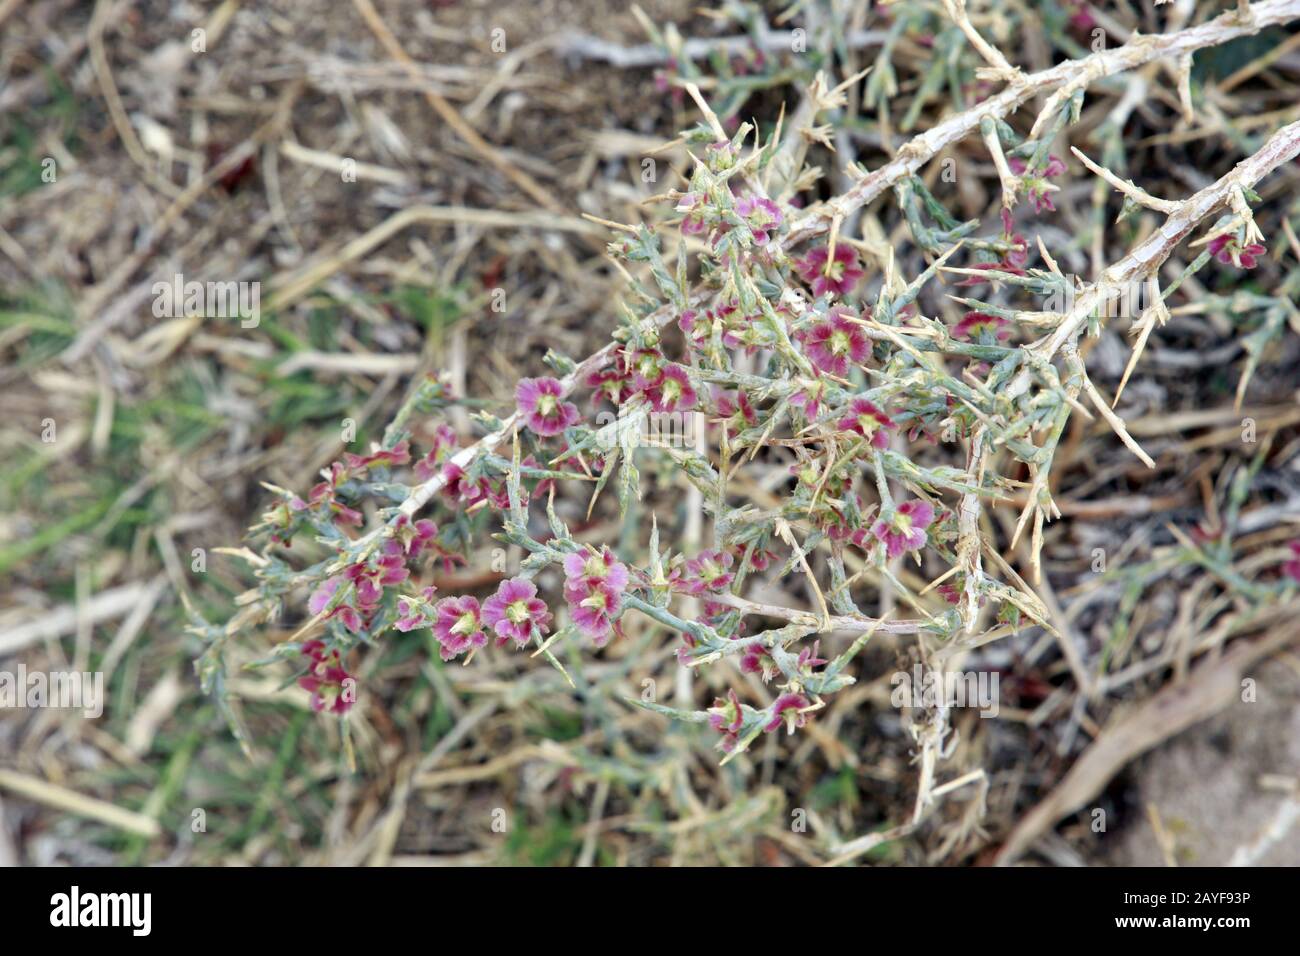 prickly Russian thistle, windwitch,common saltwort (Salsola tragus ssp. tragus) on the castle walls Stock Photo